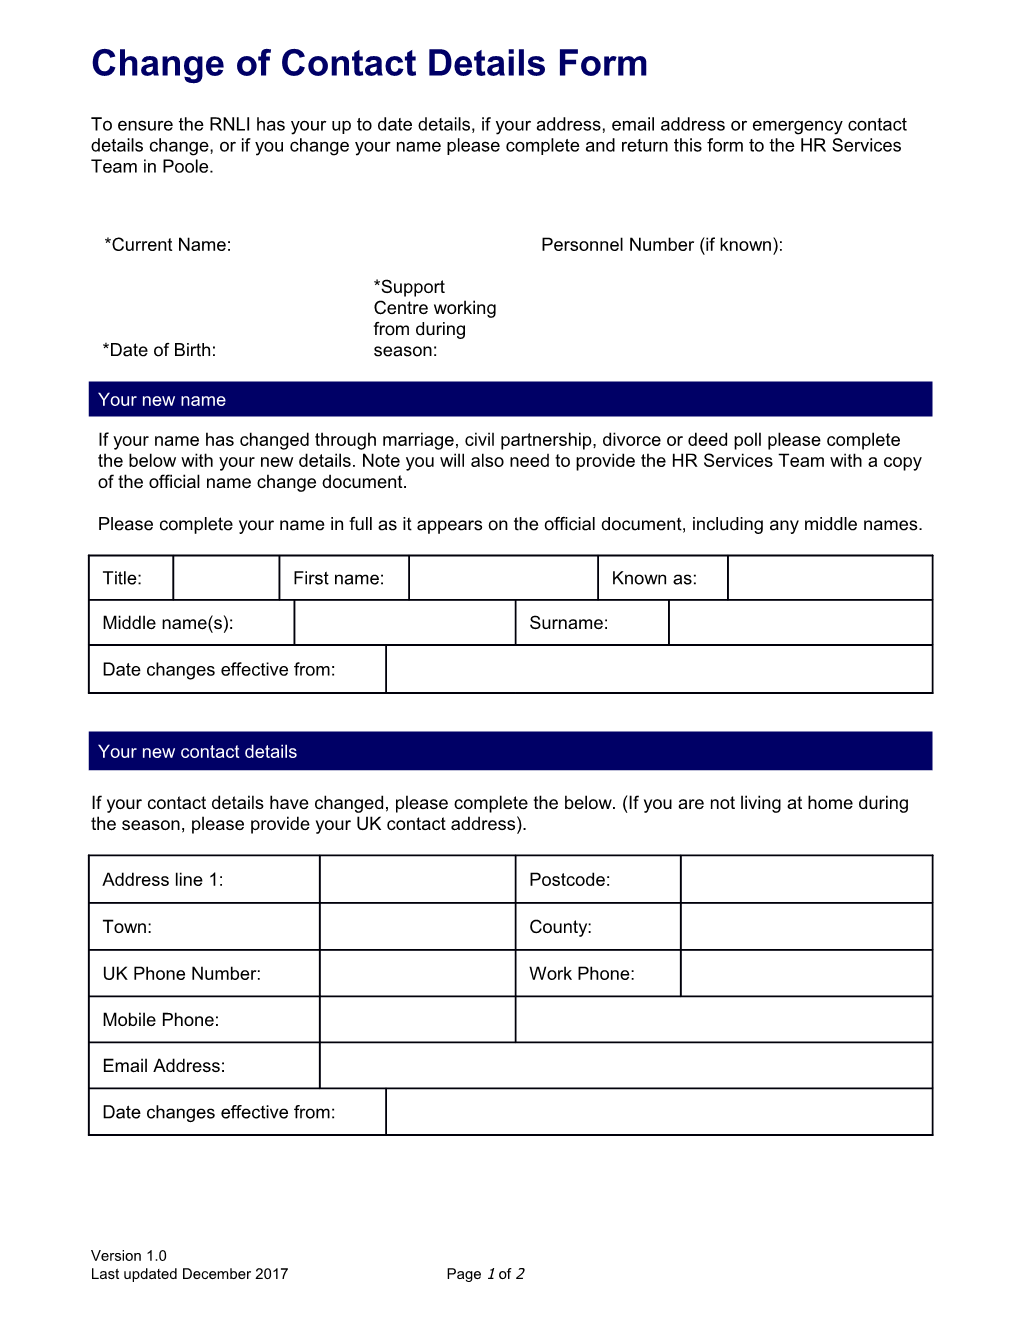 Change of Contact Details Form